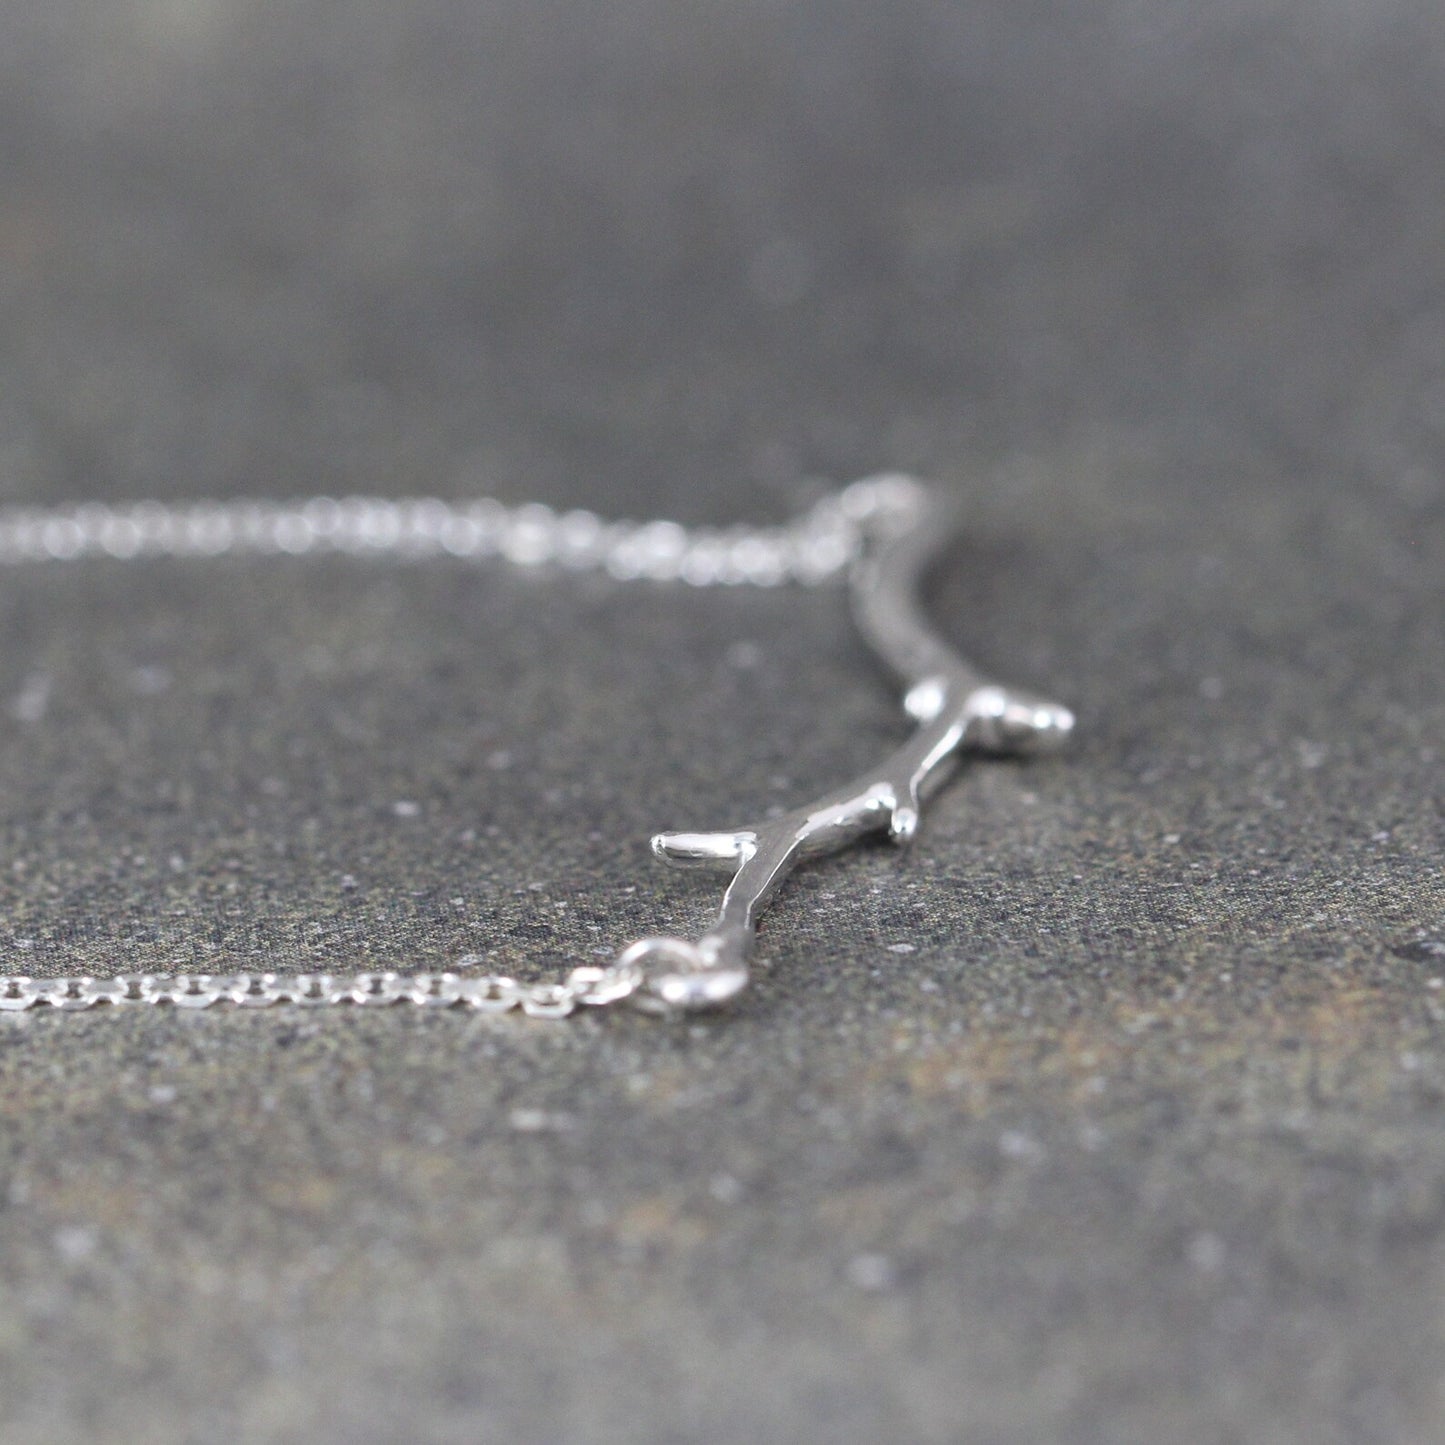 Tree Branch Bar style Necklace- Sterling Silver